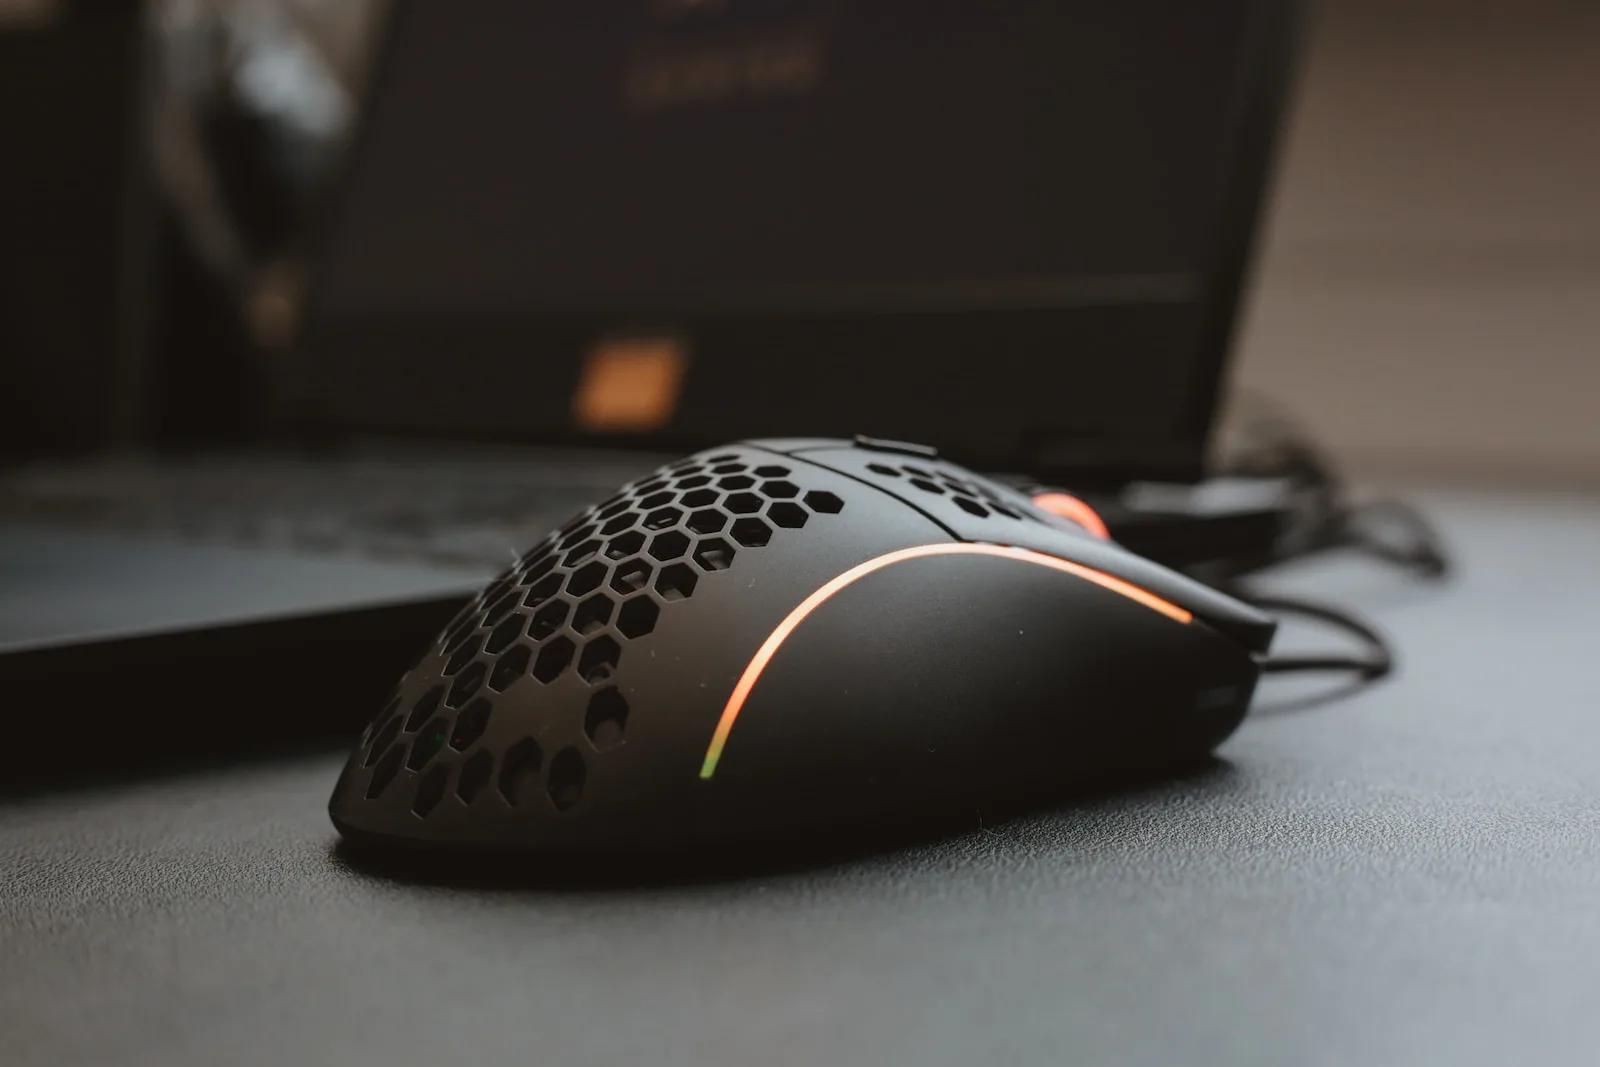 What Sets a Gaming Mouse Apart from a Regular Mouse?